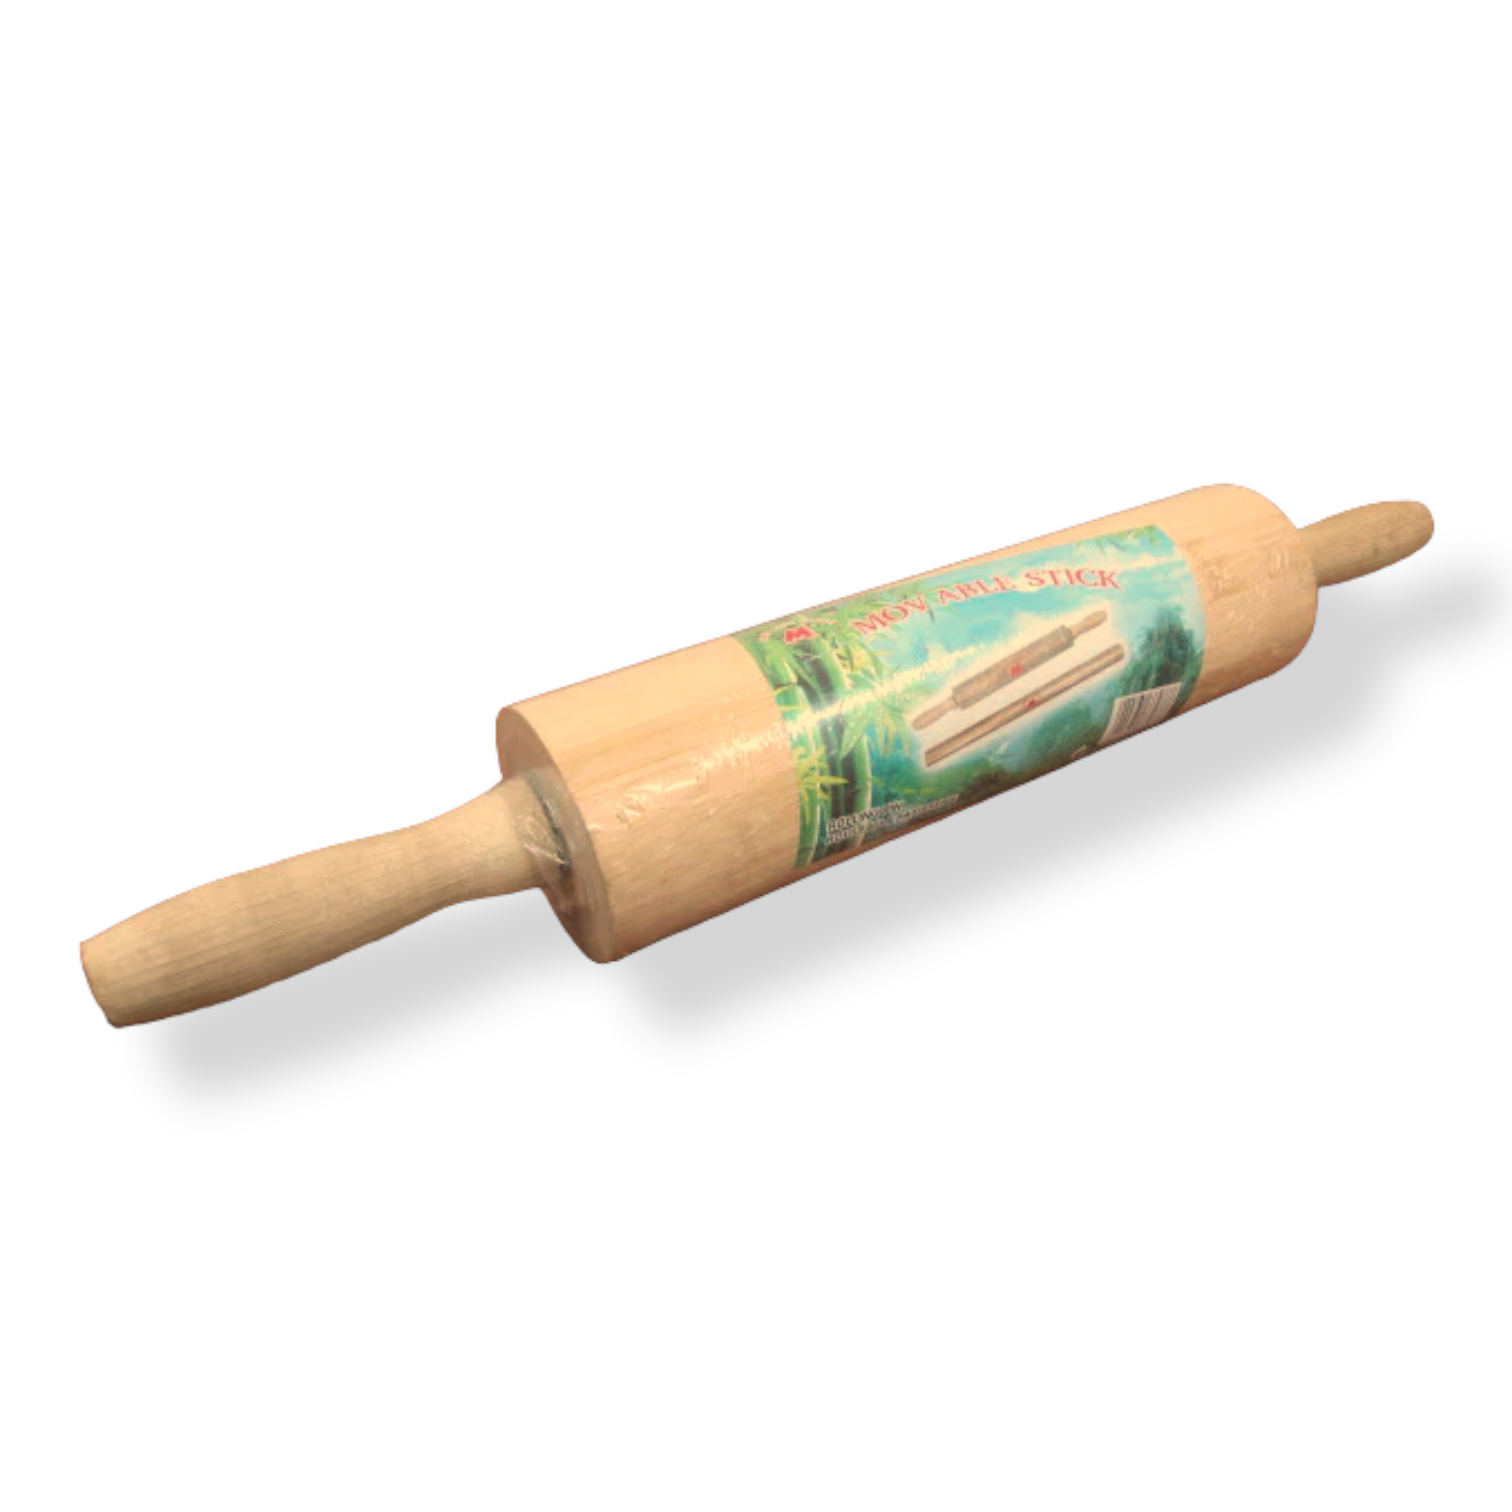 Large wooden rolling pin with rotating axes - Lunaz Shop